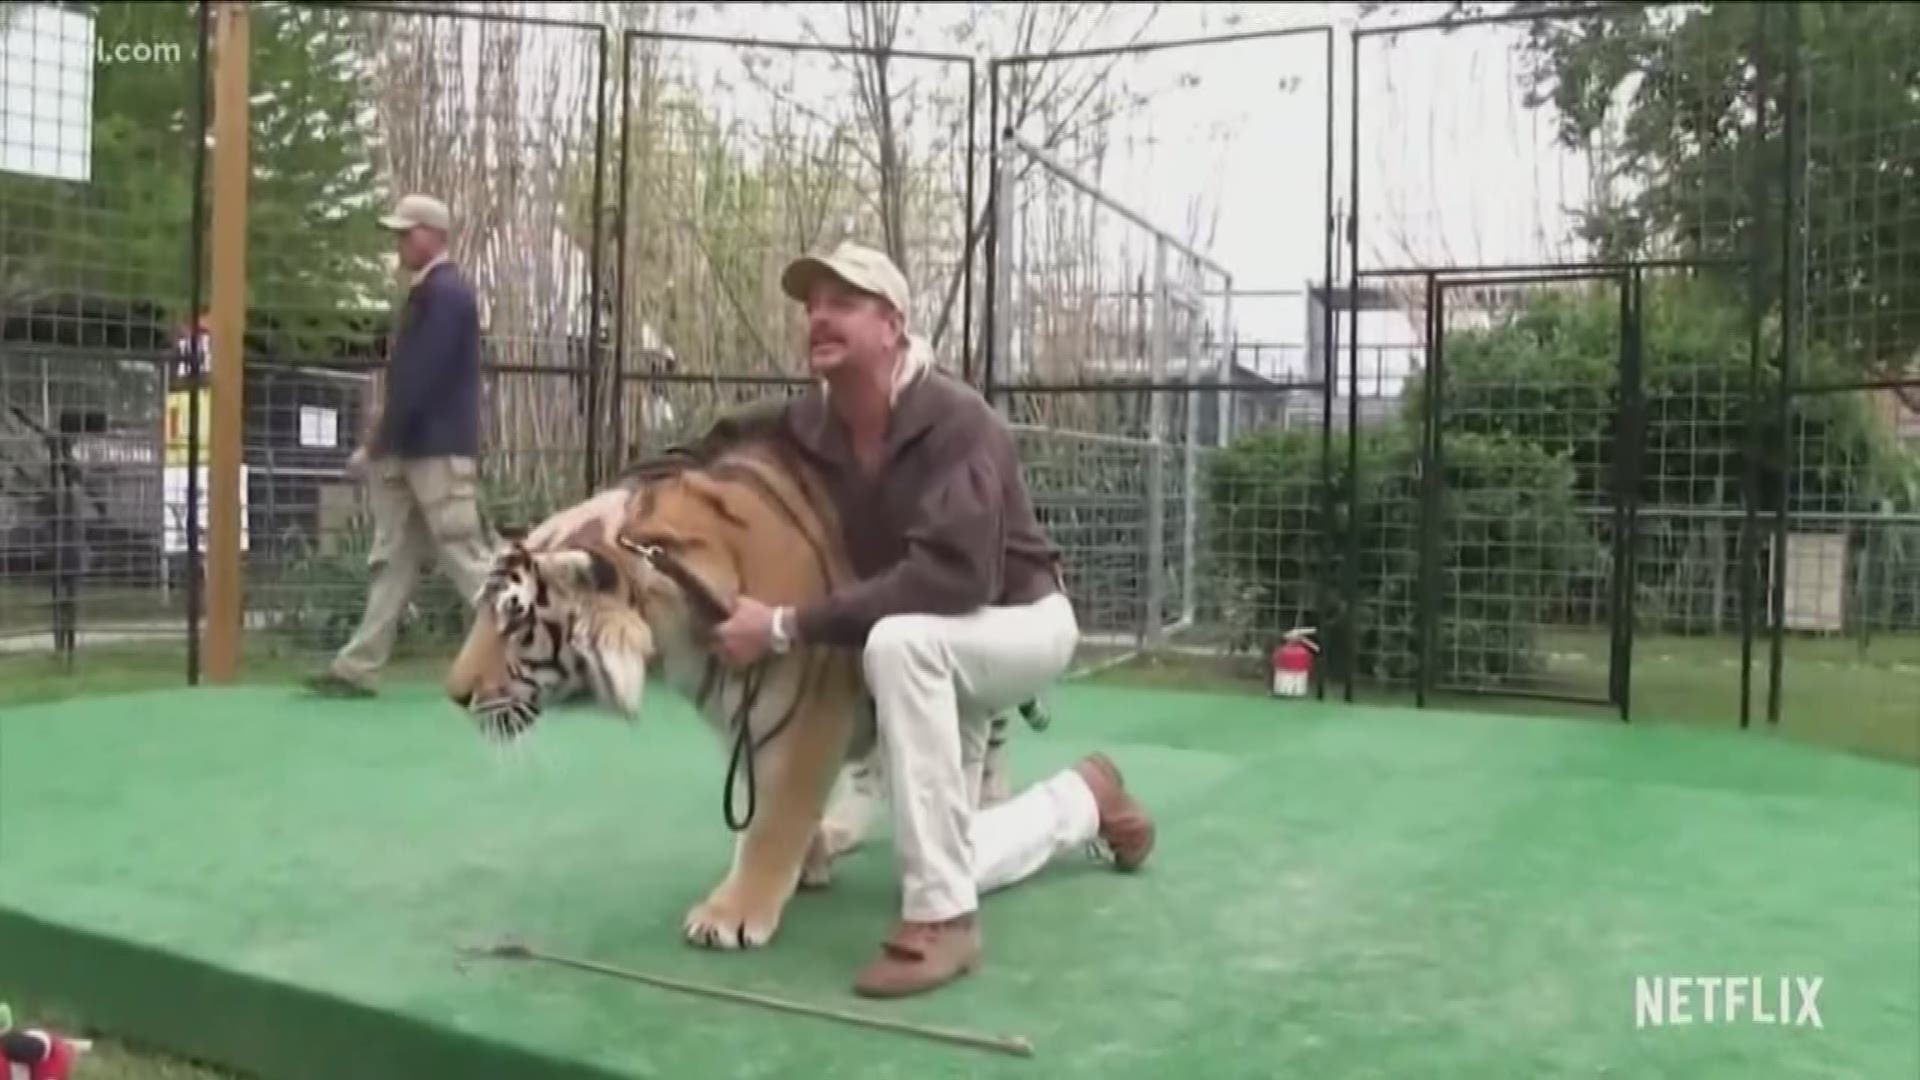 Josh Bethel was approached by 'Joe Exotic' in Toledo in 2009. He then became part of the staff of the traveling exotic animal show.